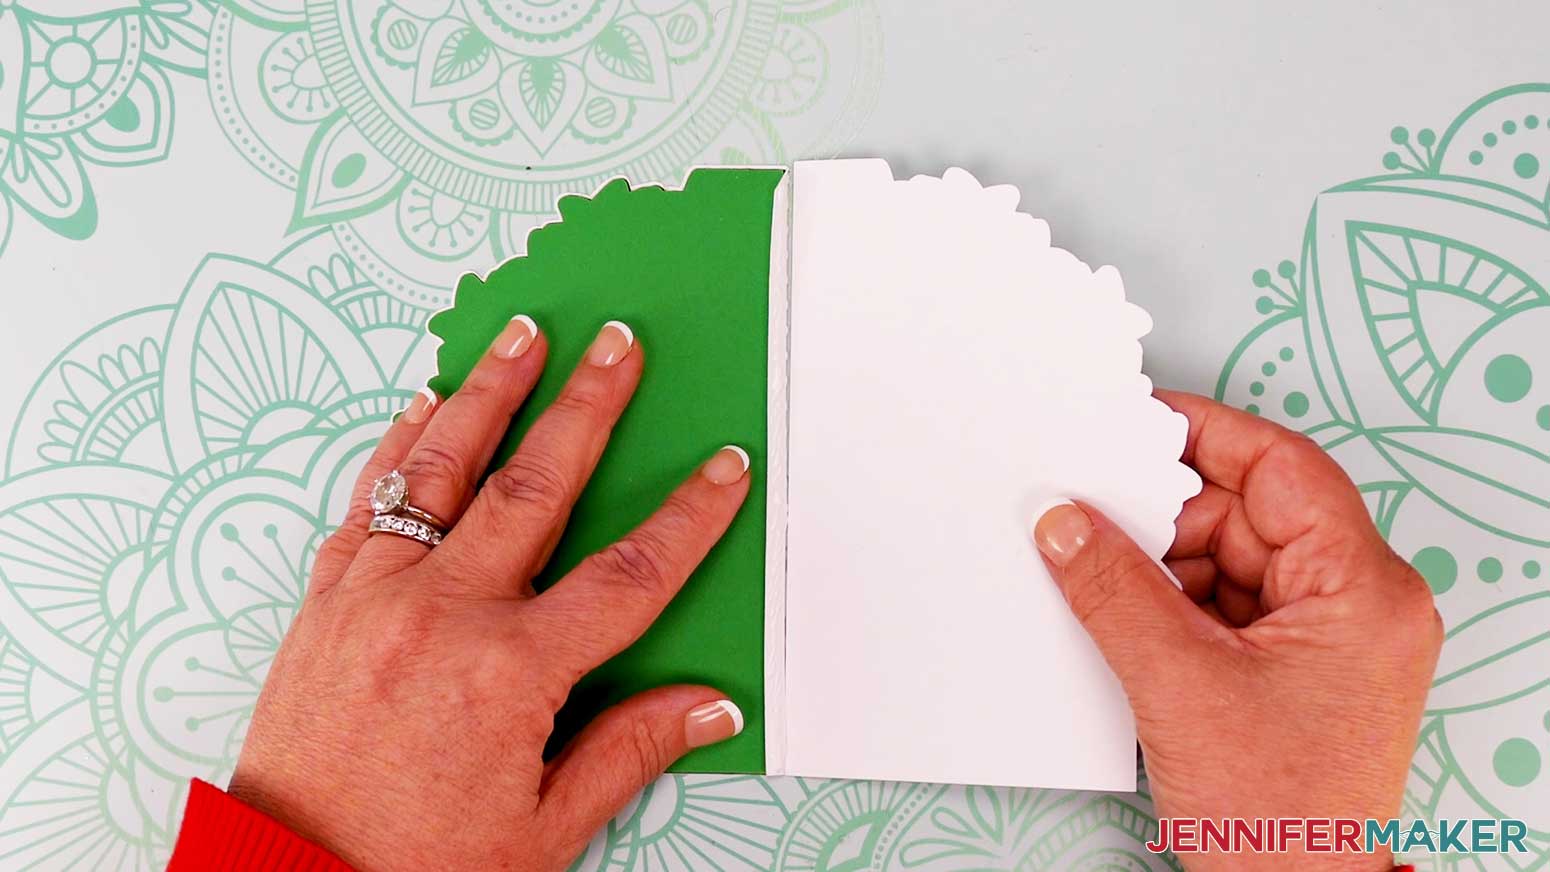 Align the inner edges of the front and back panels in order to attach the tab for the Joy-size tree shaped edge card